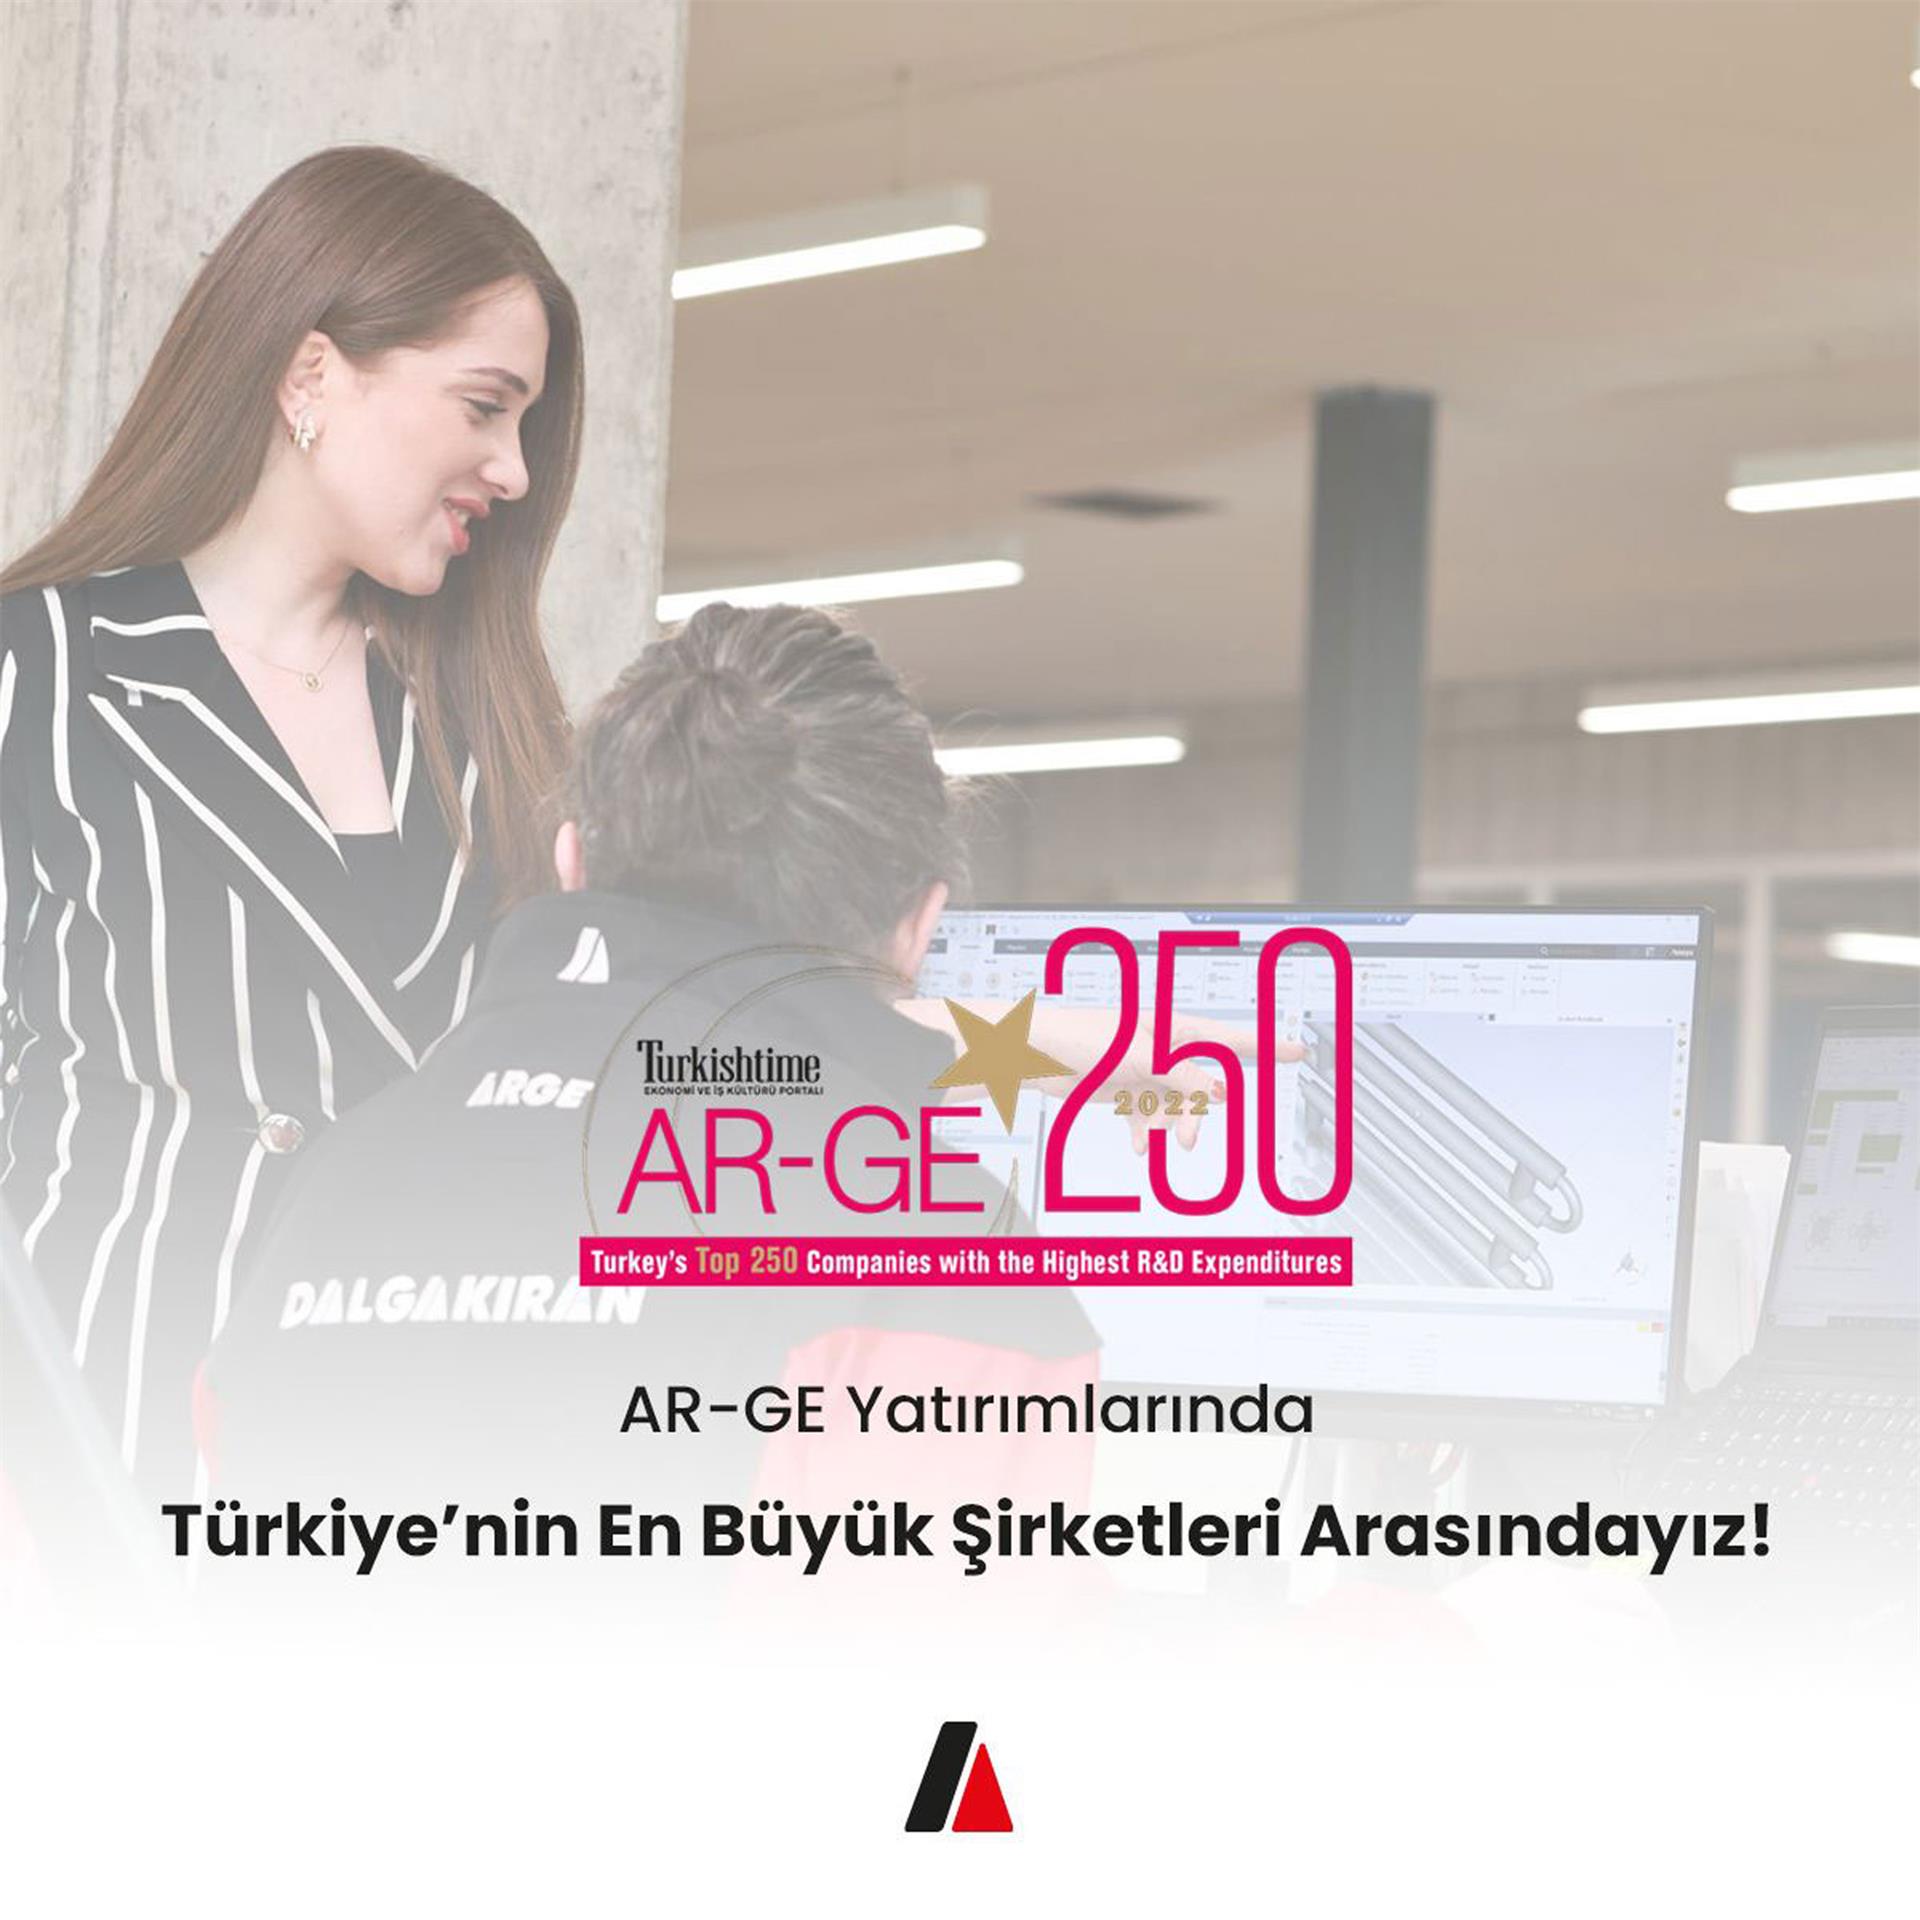 We Are Among Turkey's Largest Companies in R&D Investments!